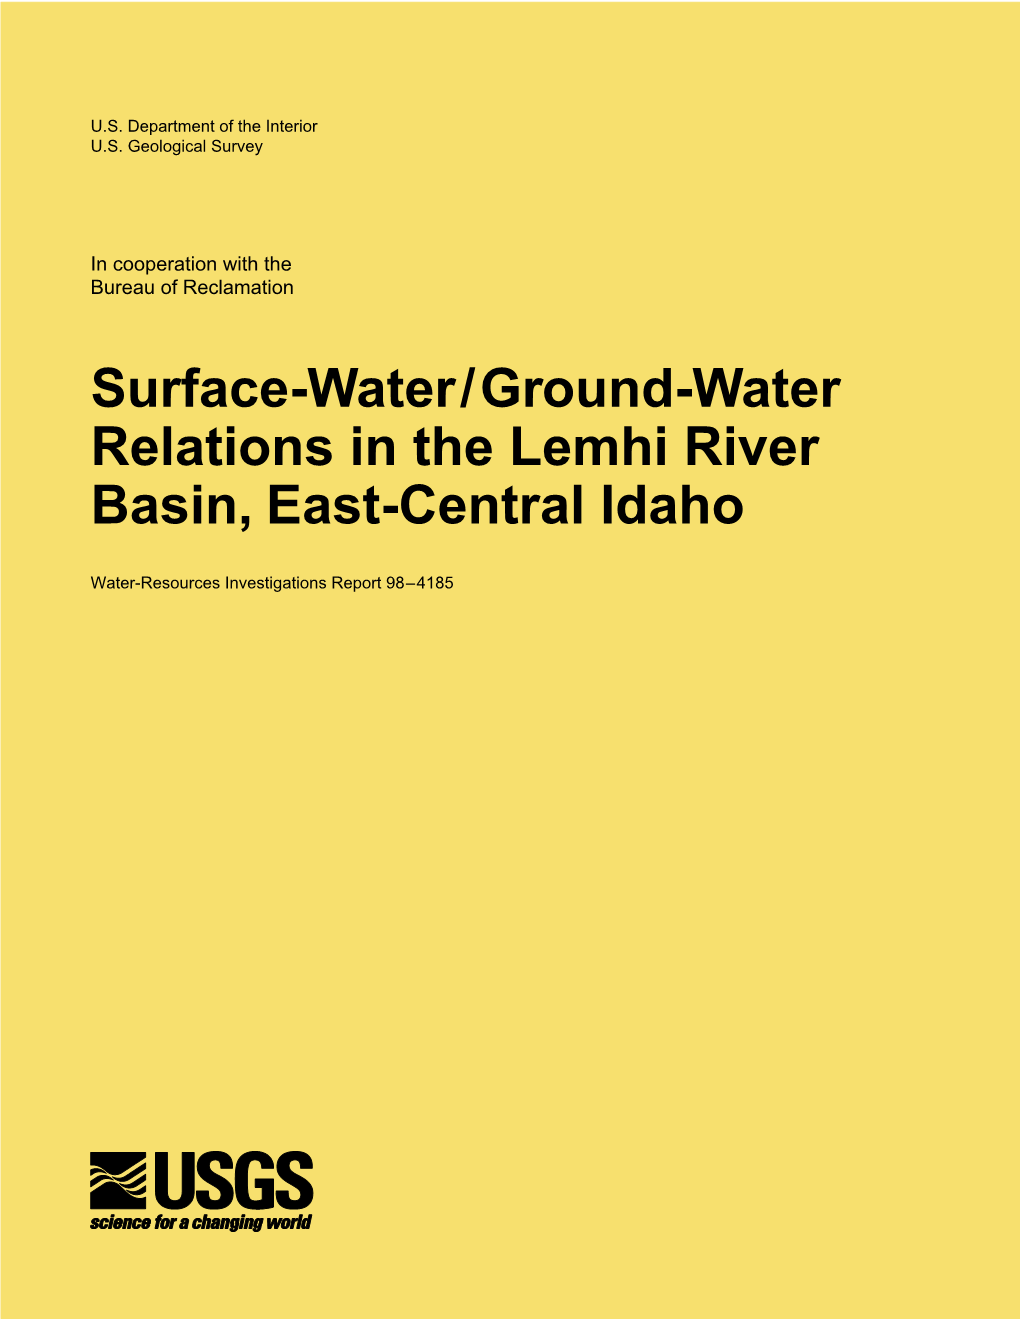 Surface-Water/Ground-Water Relations in the Lemhi River Basin, East-Central Idaho